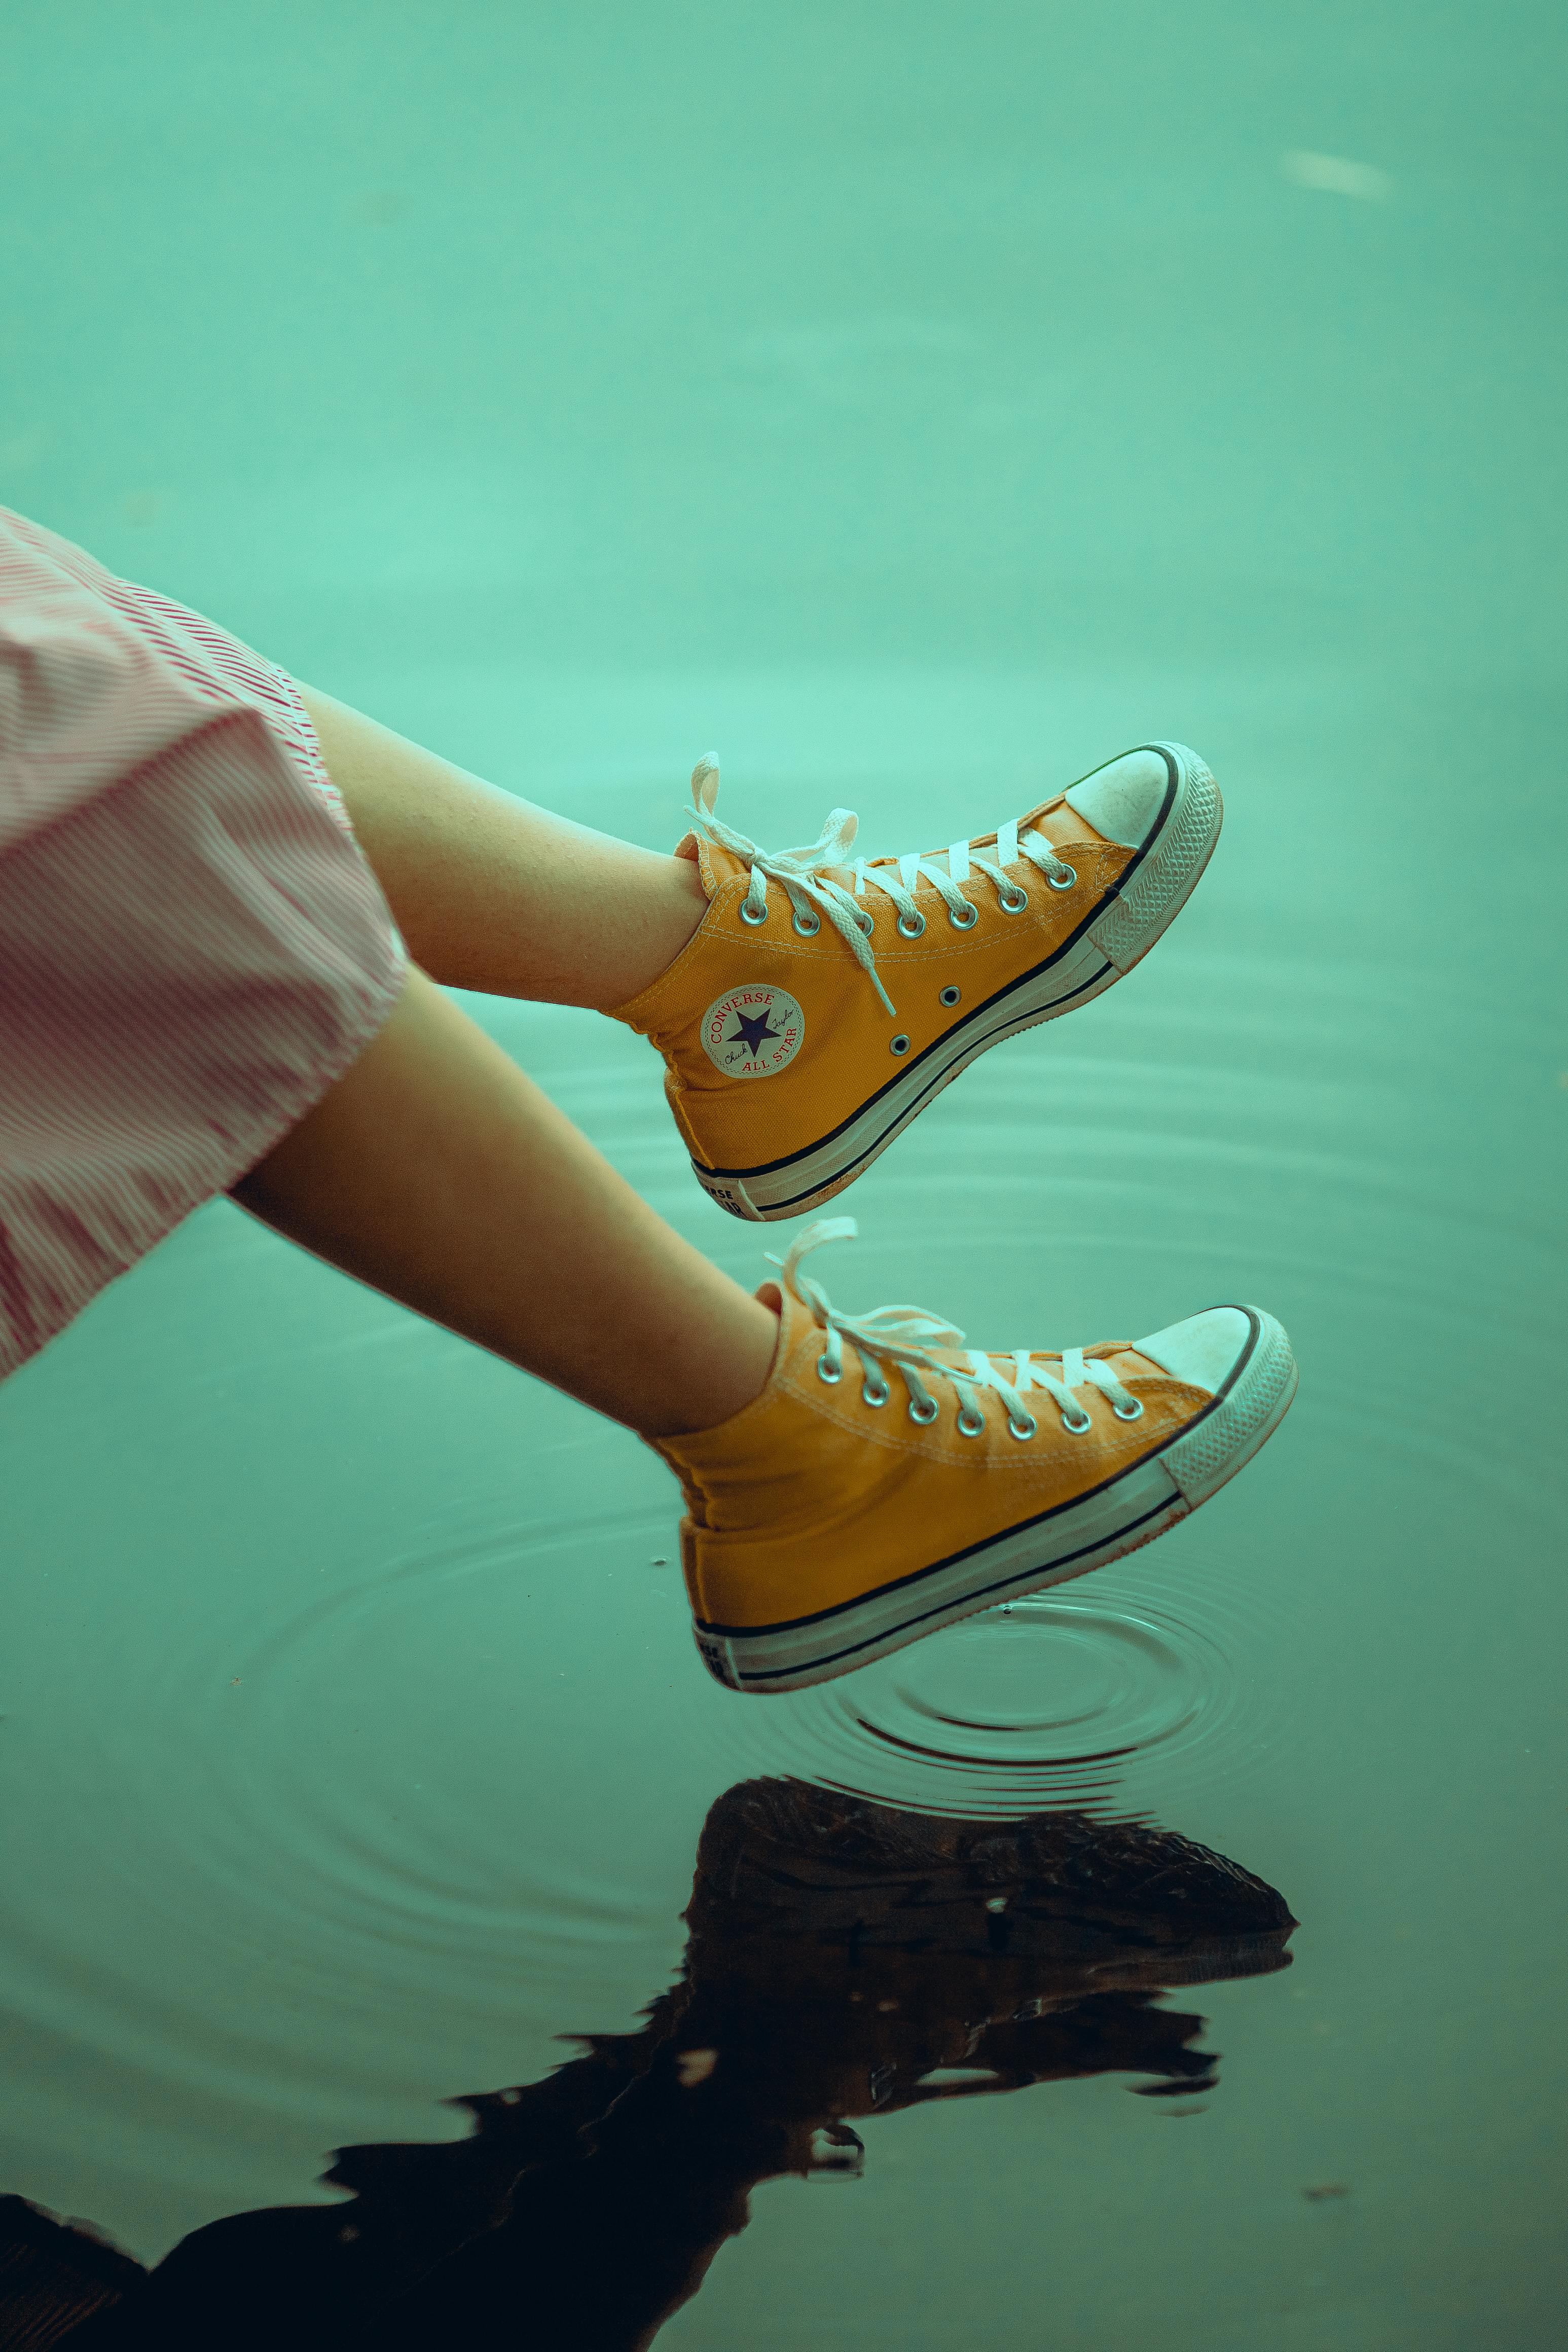 100 Converse Pictures  Download Free Images  Stock Photos on Unsplash